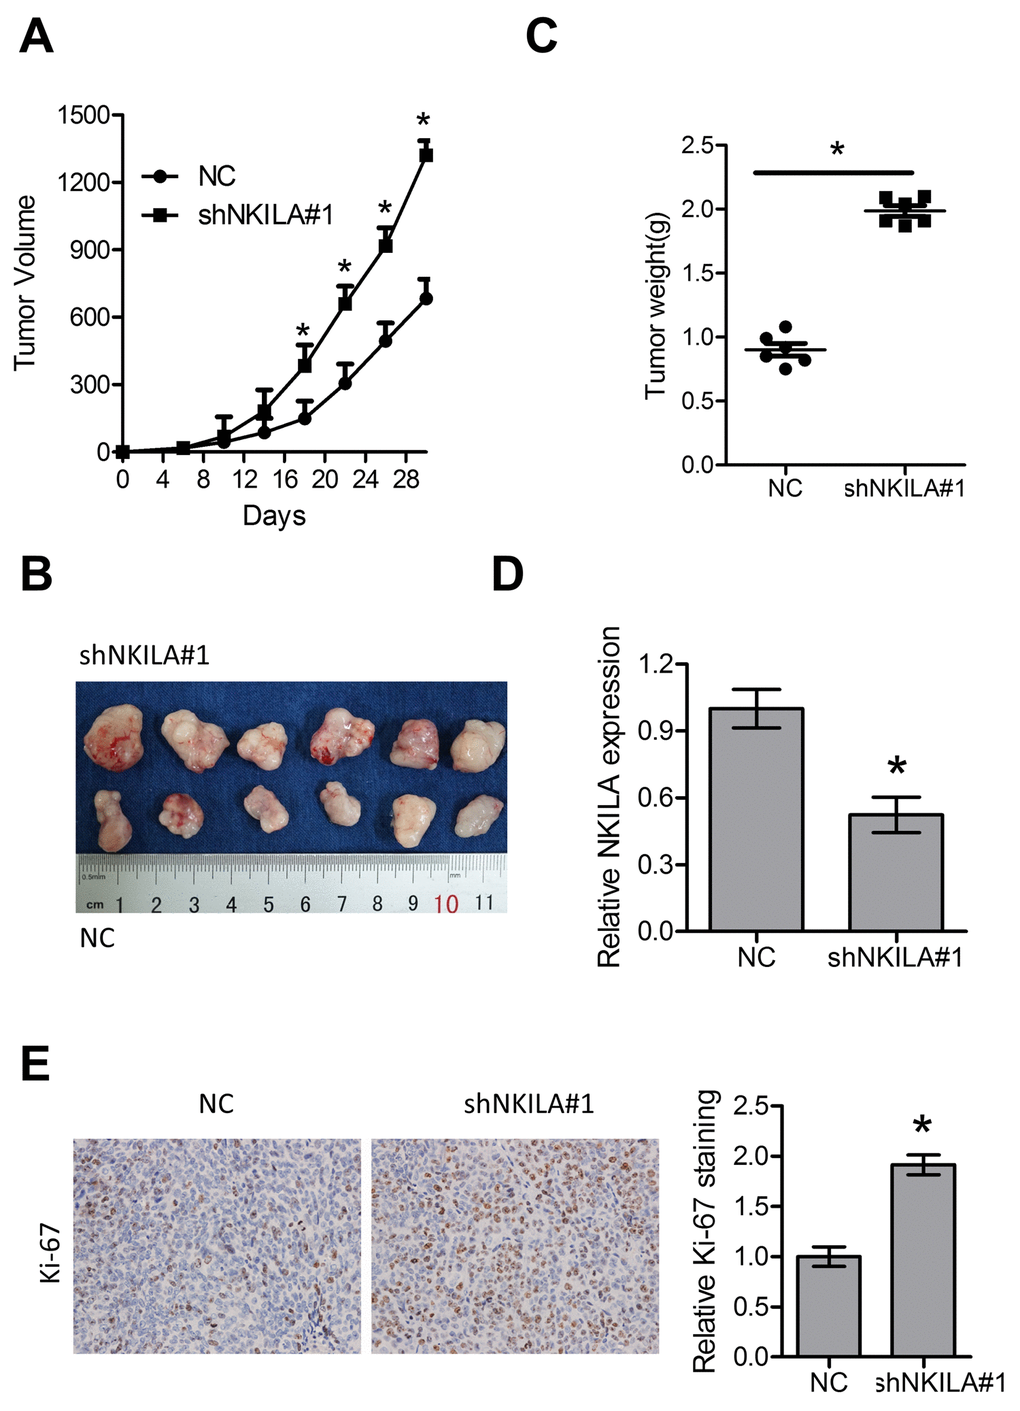 Knockdown of NKILA promotes tumor growth in nude mice. (A) Tumor growth curve of Eca109 cells after knockdown of NKILA. (B) The dissected tumors from the nude mice was photographed. (C) Weight of dissected tumors was recorded. (D) Expression level of NKILA in the dissected tumors was detected by qPCR. (E) Immunohistochemical analysis of Ki-67 in the dissected tumors. Left panel was representative images and right panel was statistical quantification. Data in A, C, D and E represents the mean ± SD of six mice. *P 